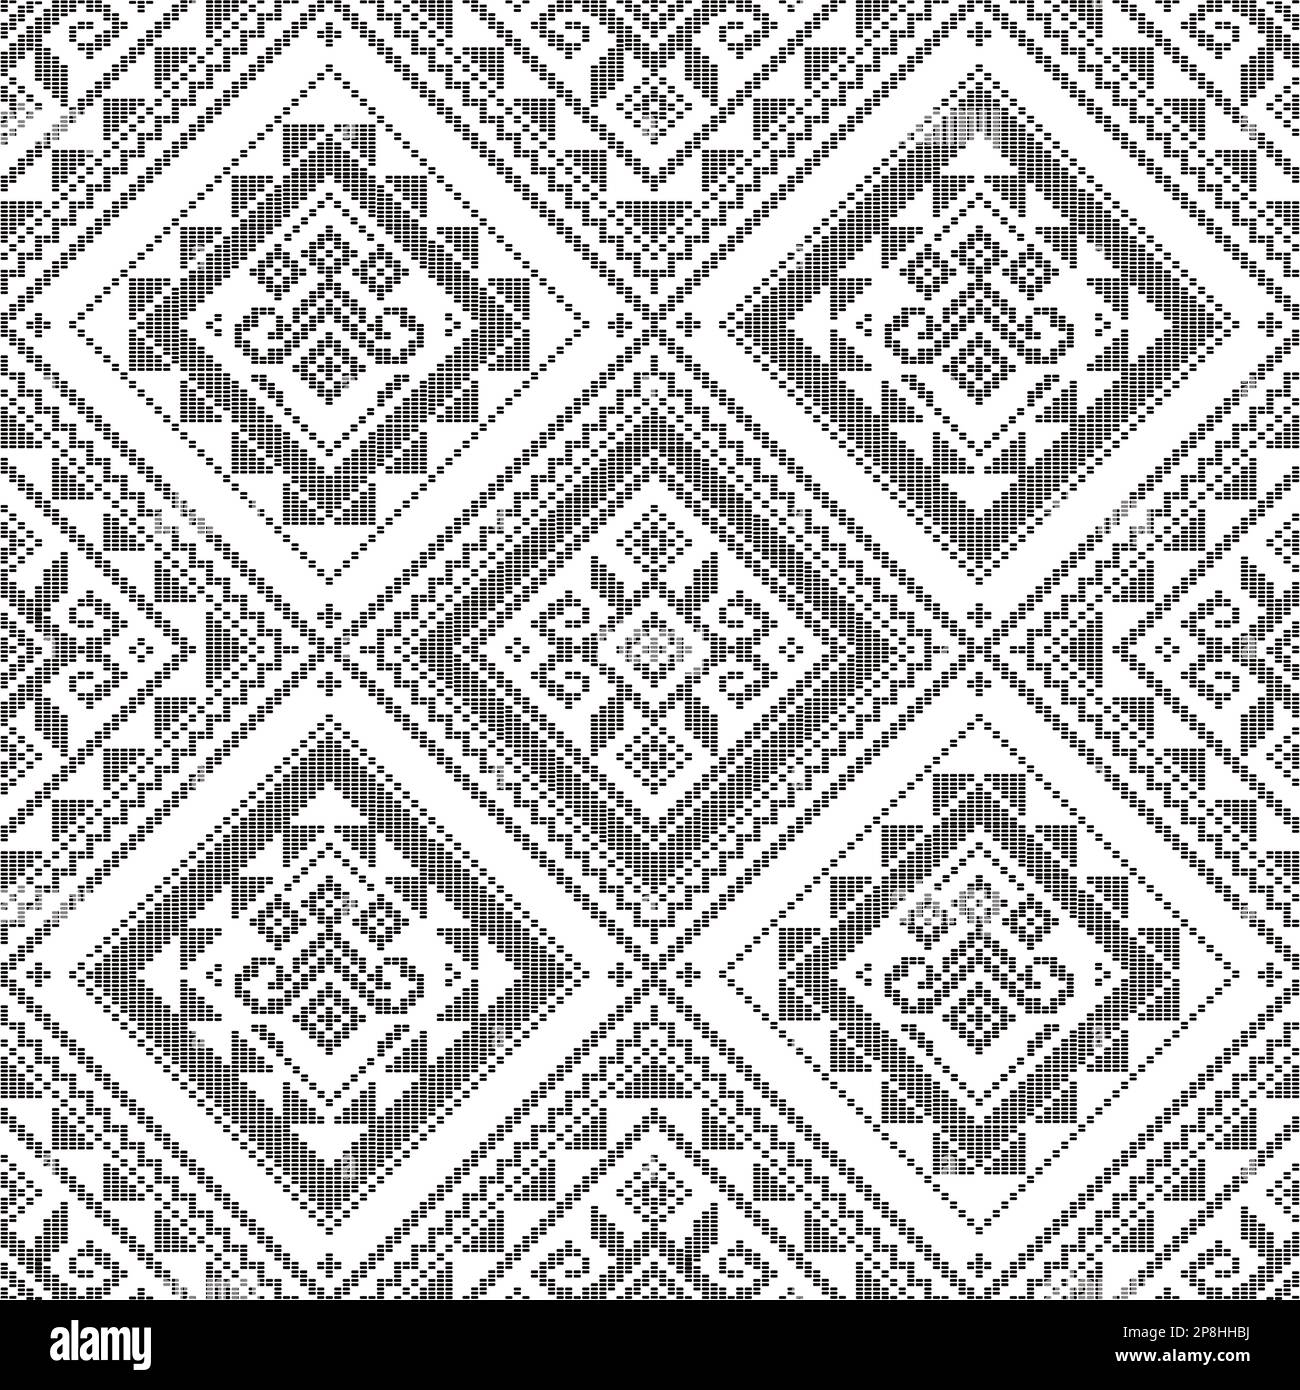 Filipino folk art Yakan cloth inspired vector seamless pattern, geometric textile or fabric print design from Philippines in black and white Stock Vector